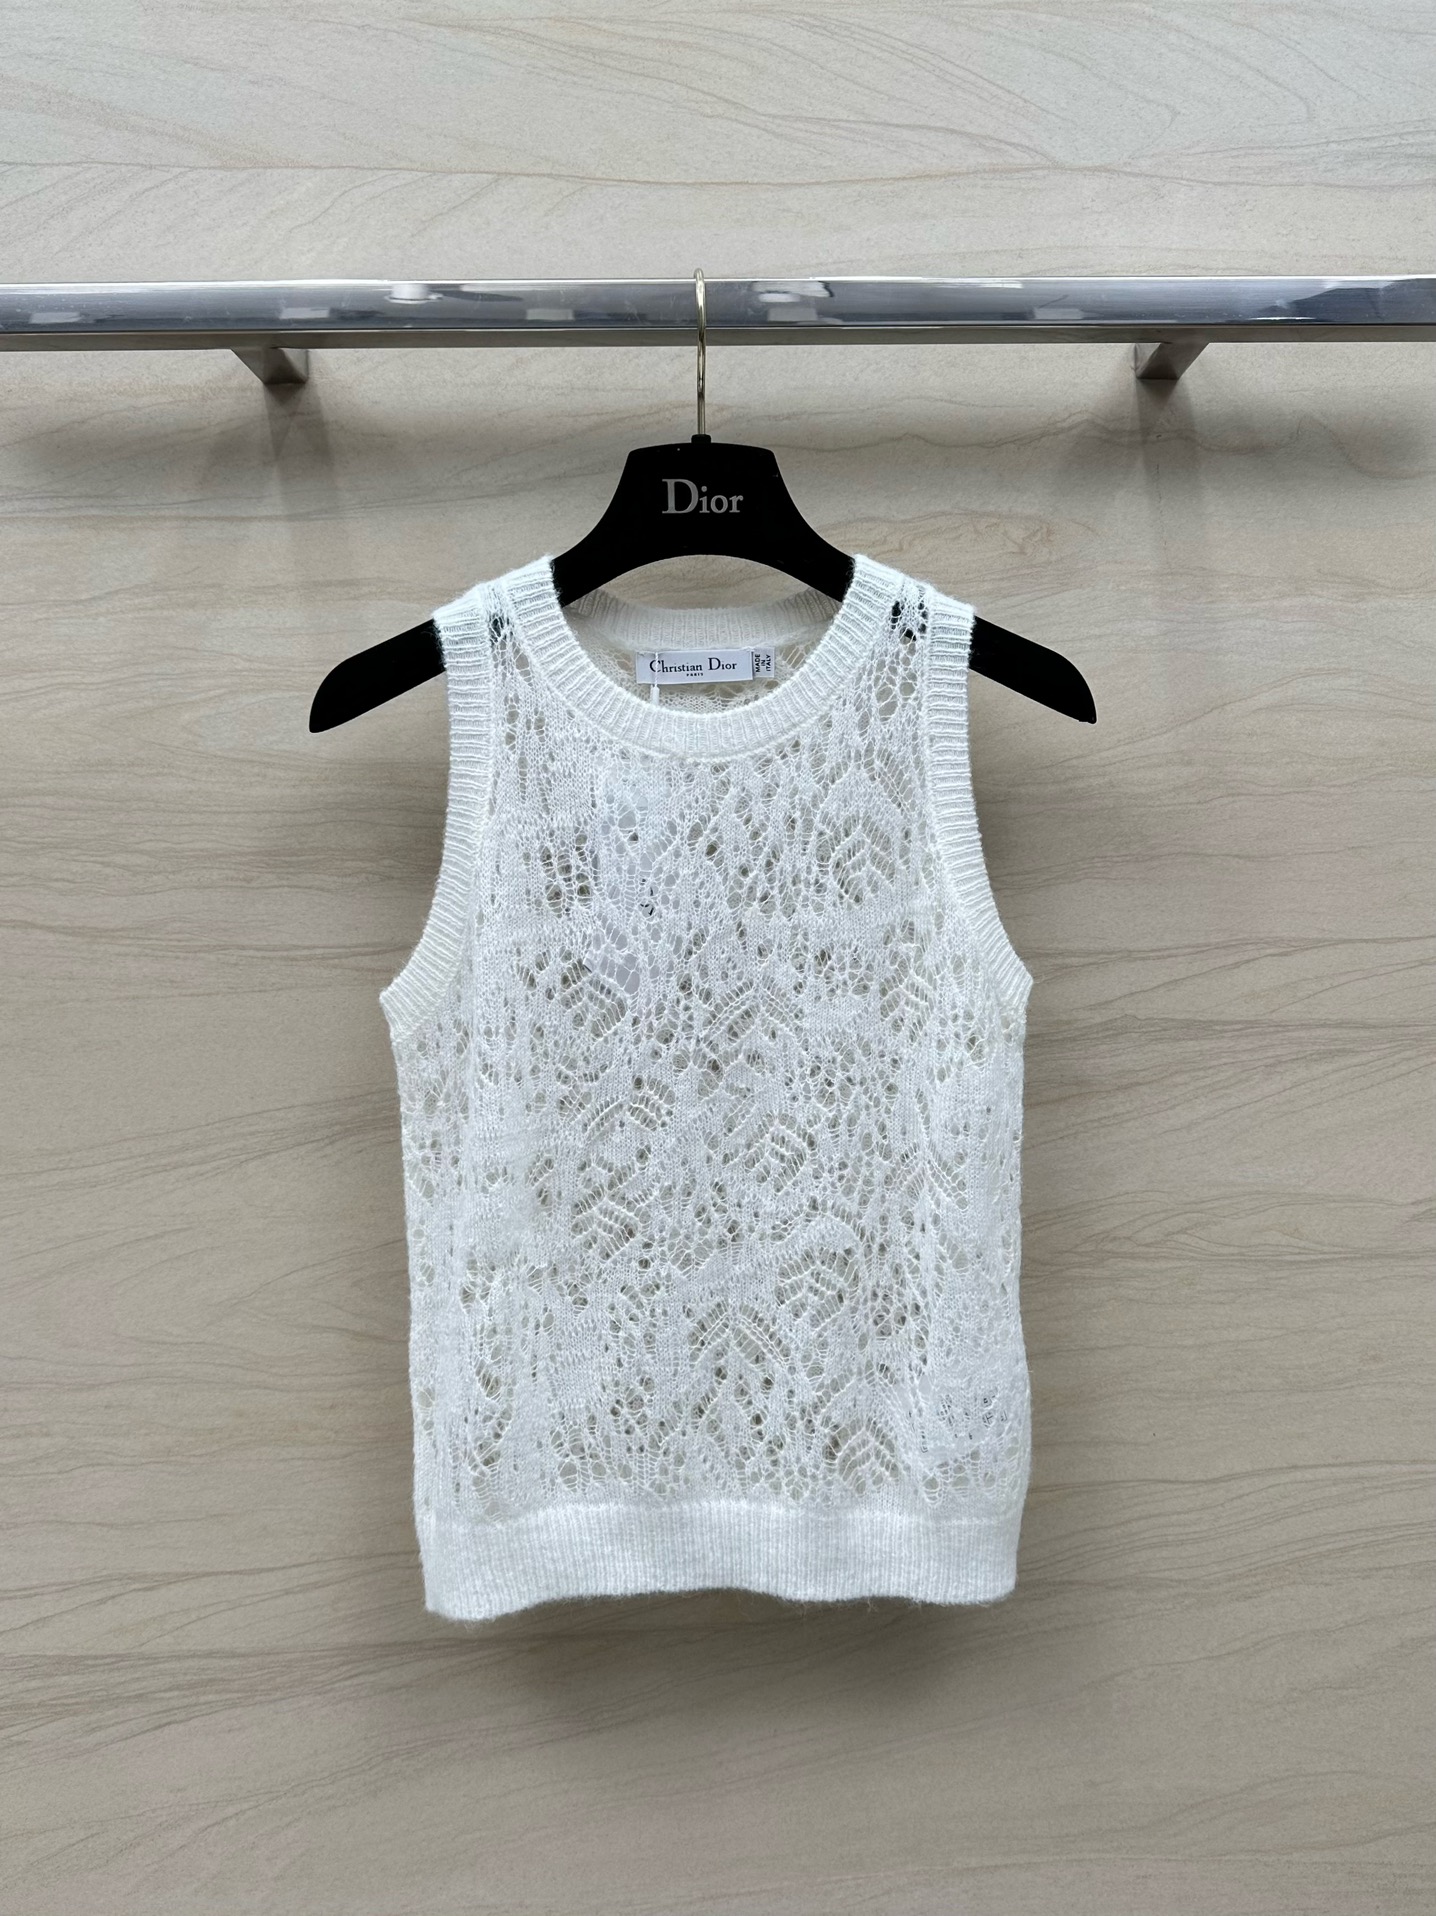 Dior Clothing Tank Tops&Camis White Openwork Knitting Spring/Summer Collection